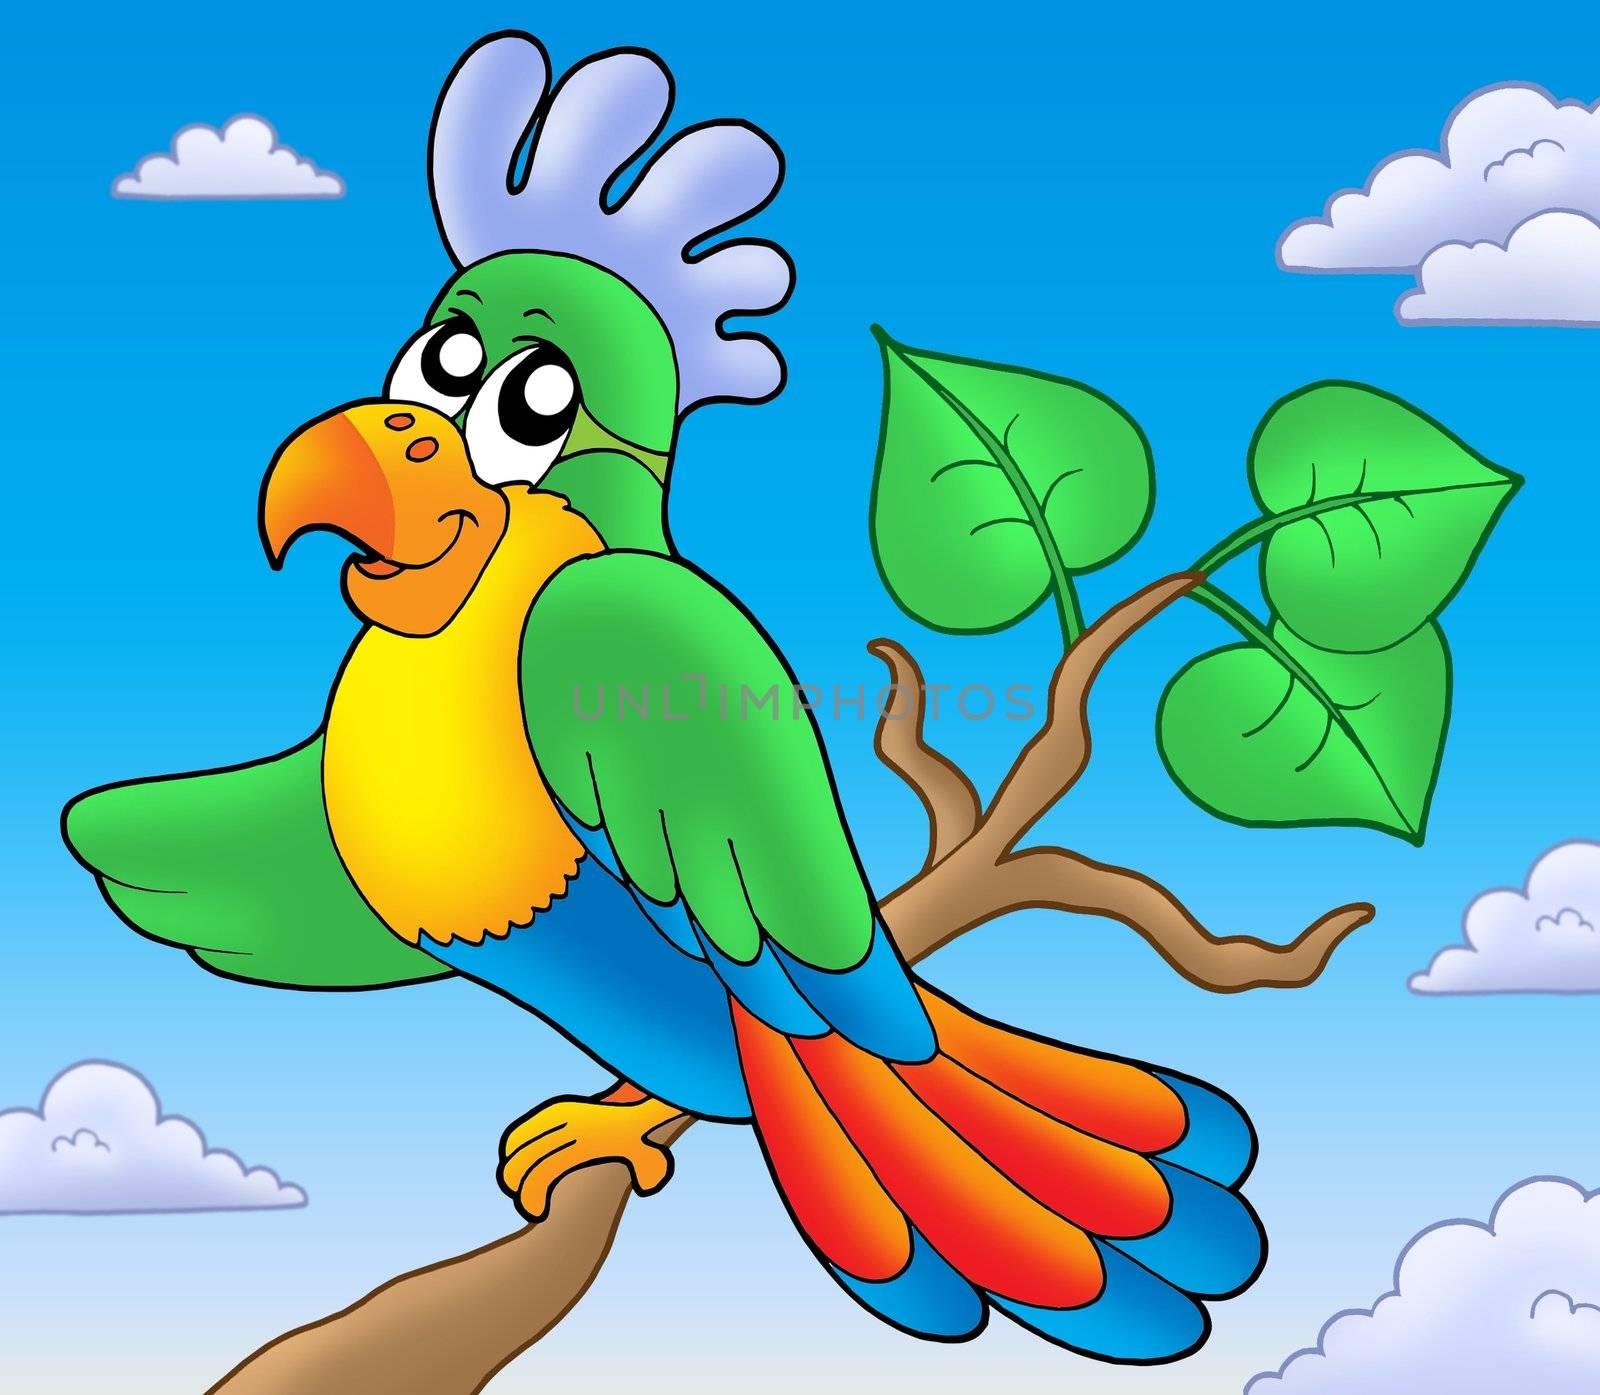 Cartoon parrot on branch by clairev